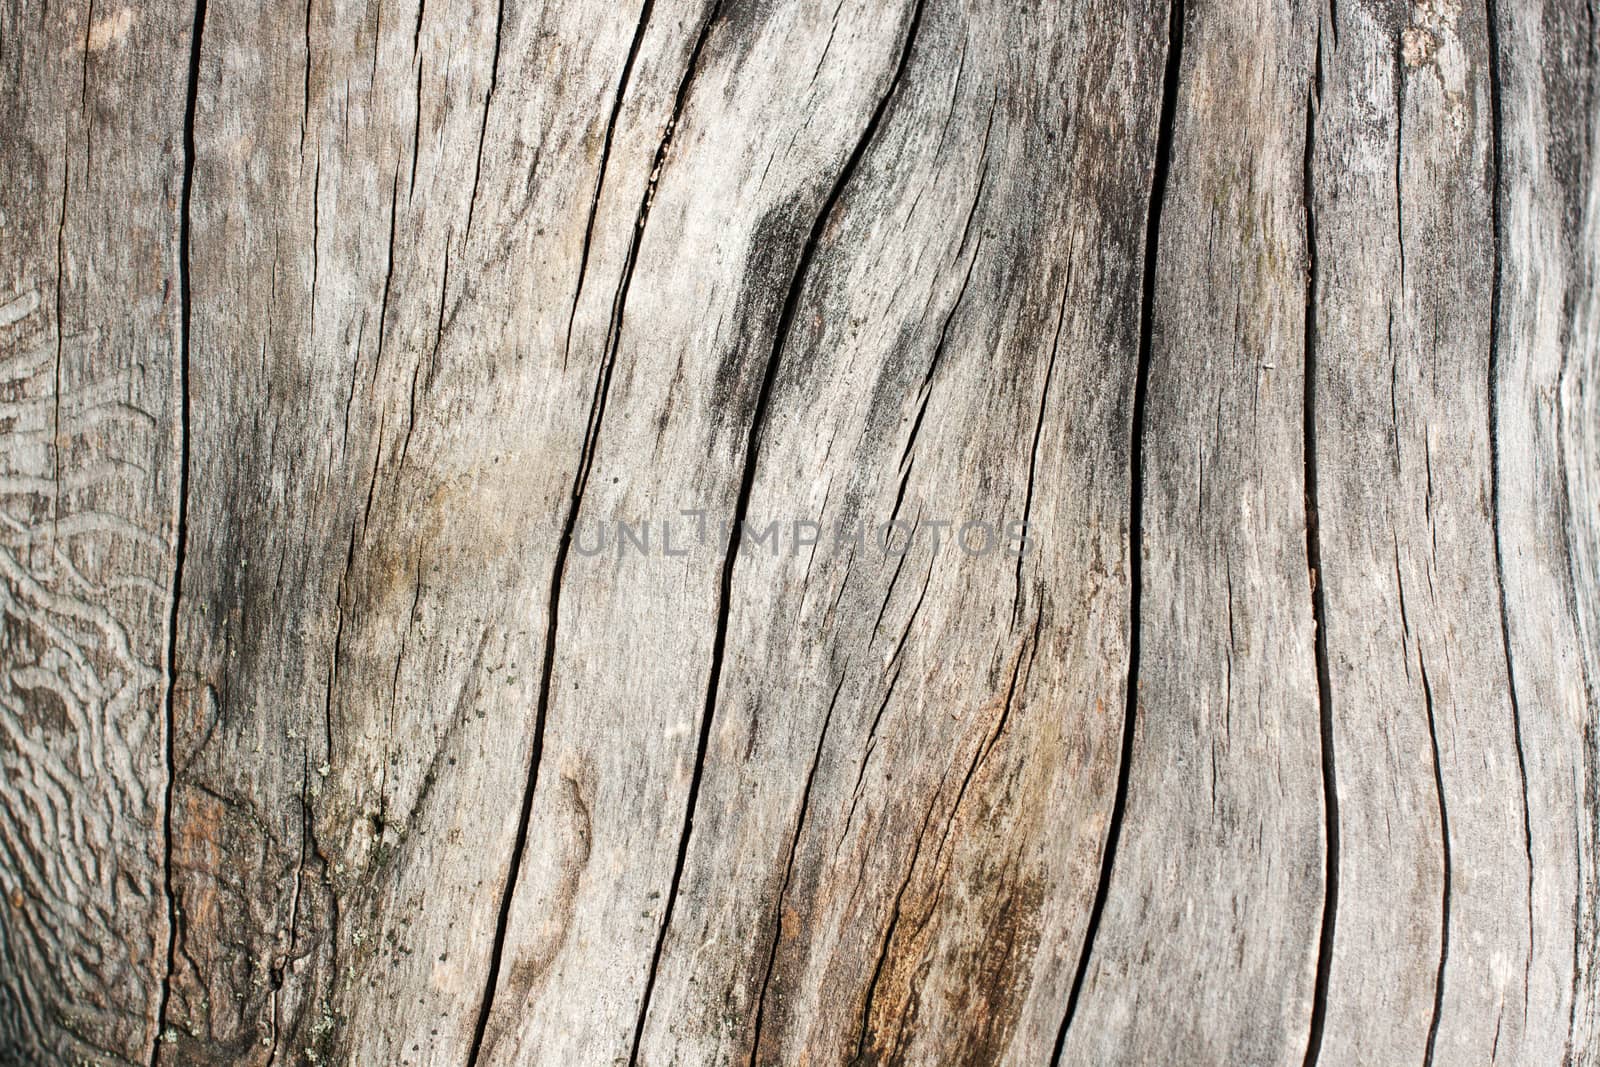 Dirty old wooden background